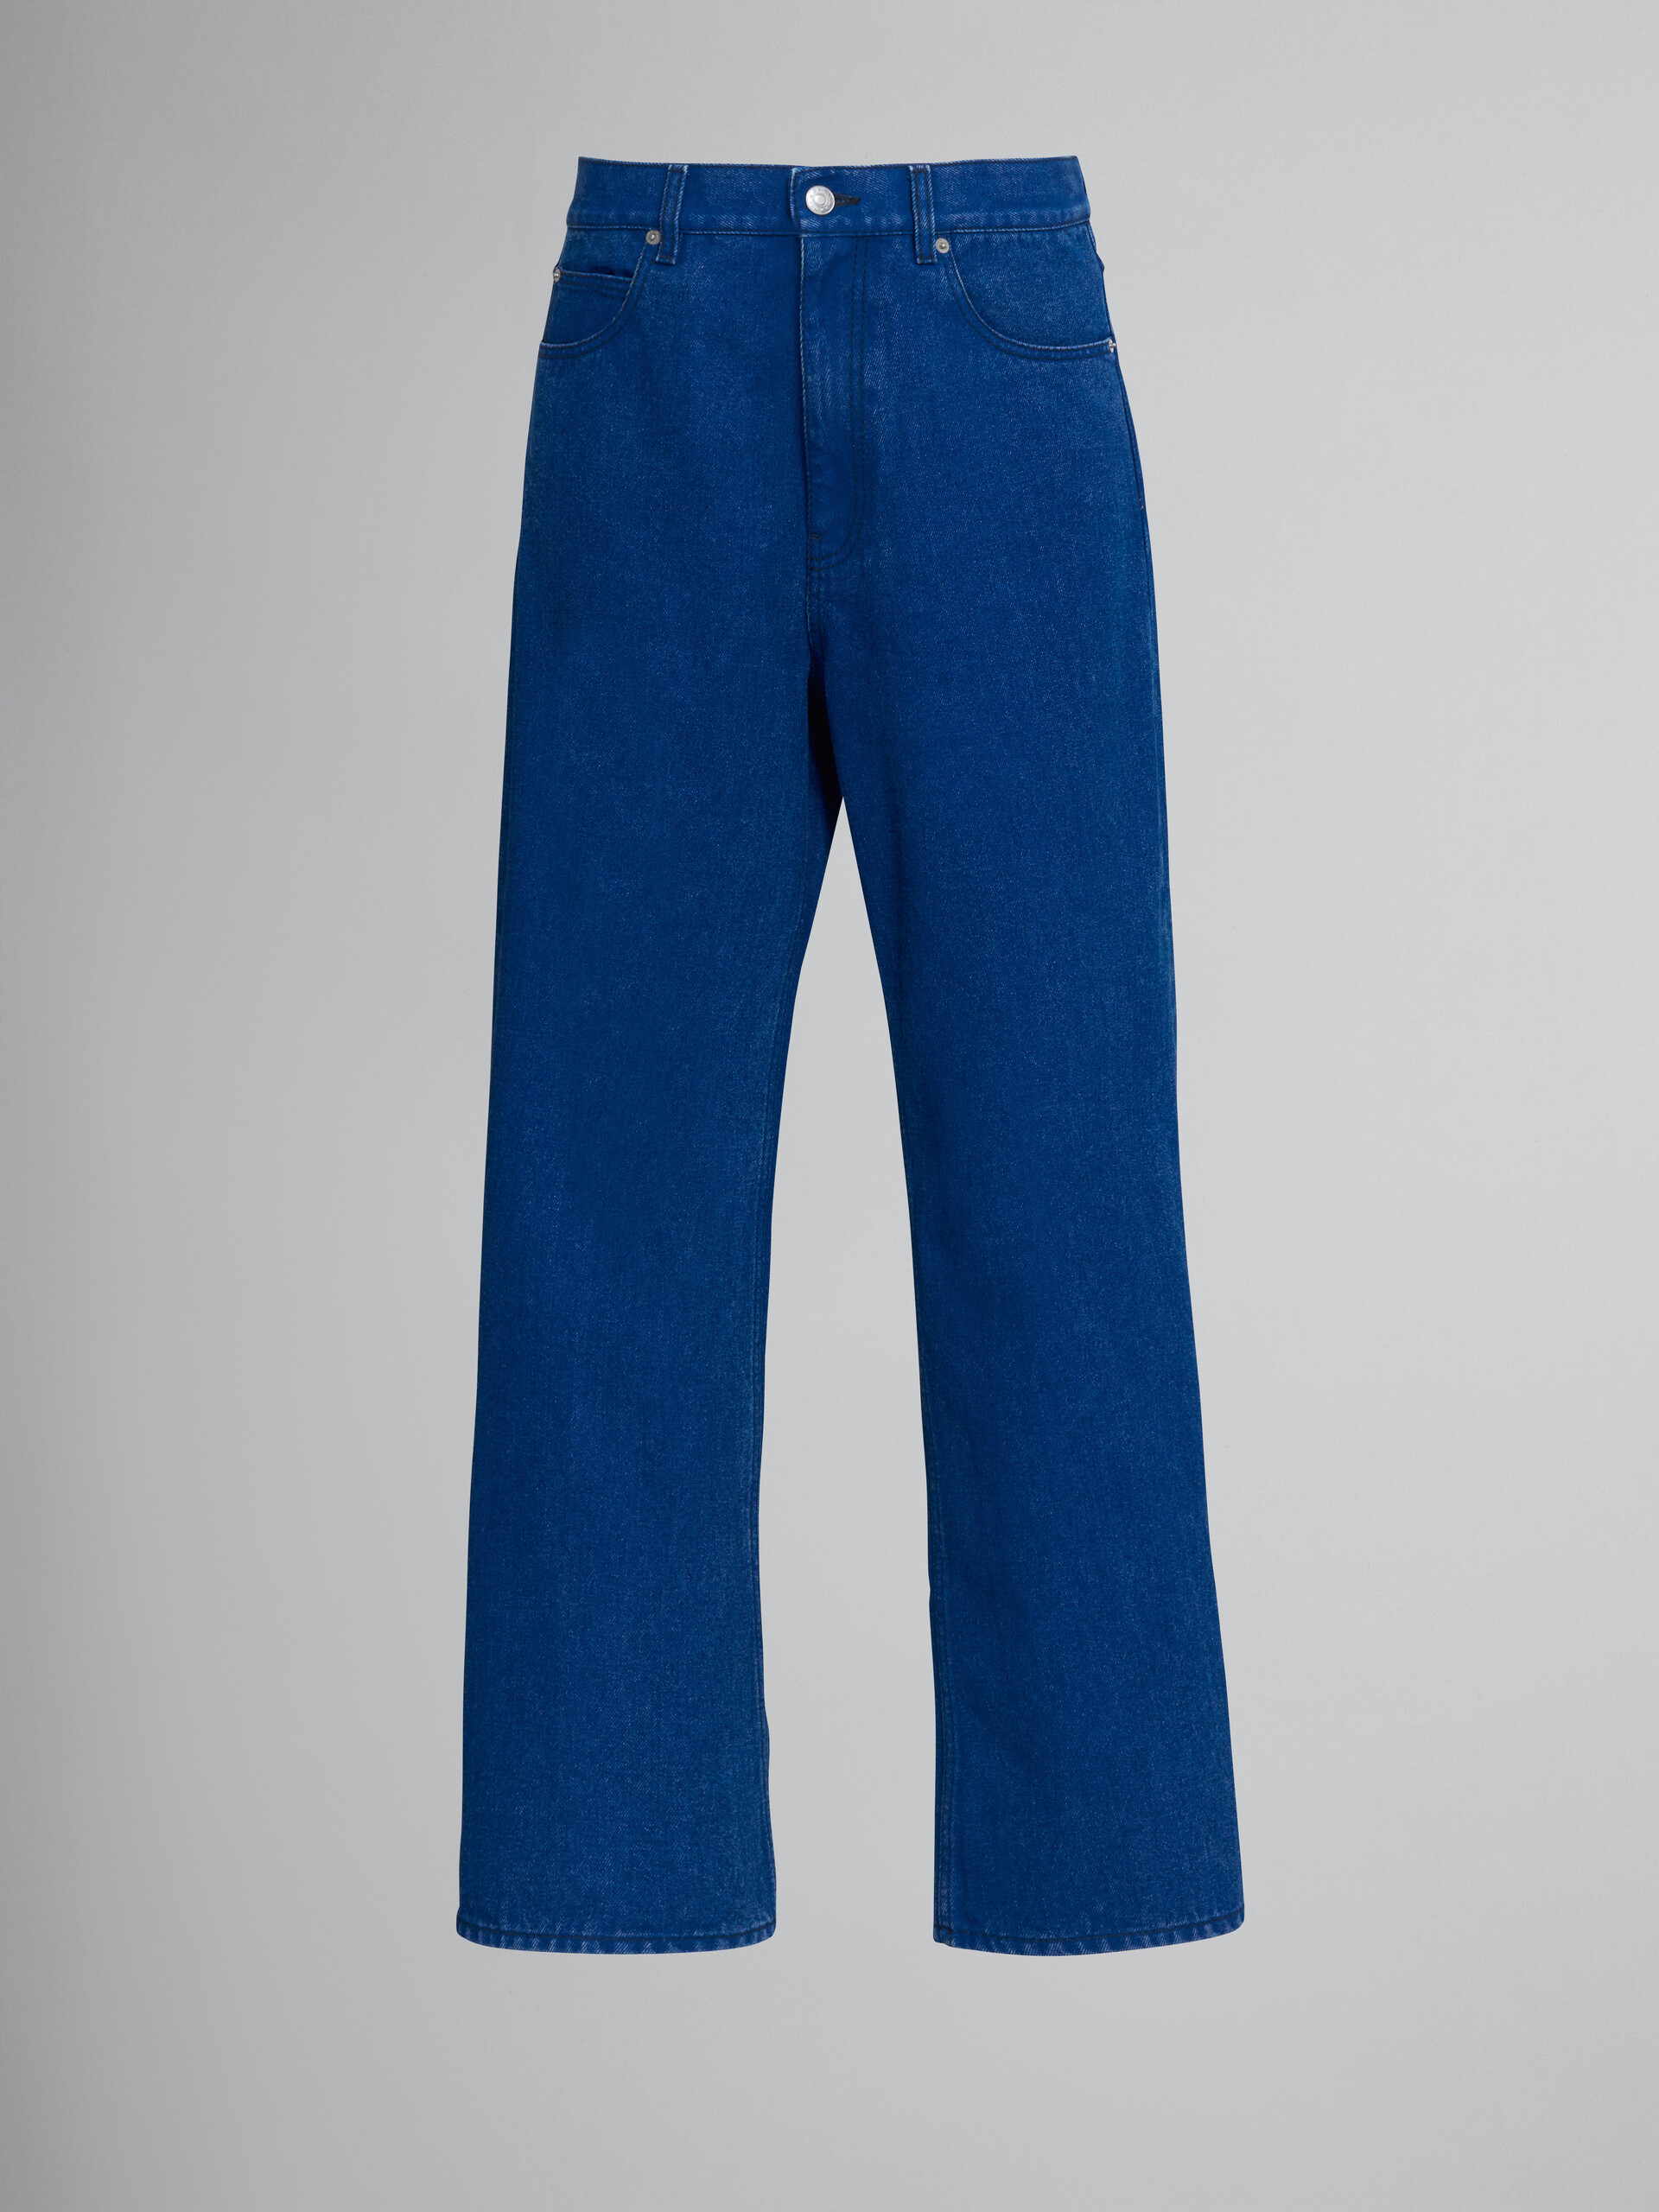 Flared trousers in coated blue denim - Pants - Image 1